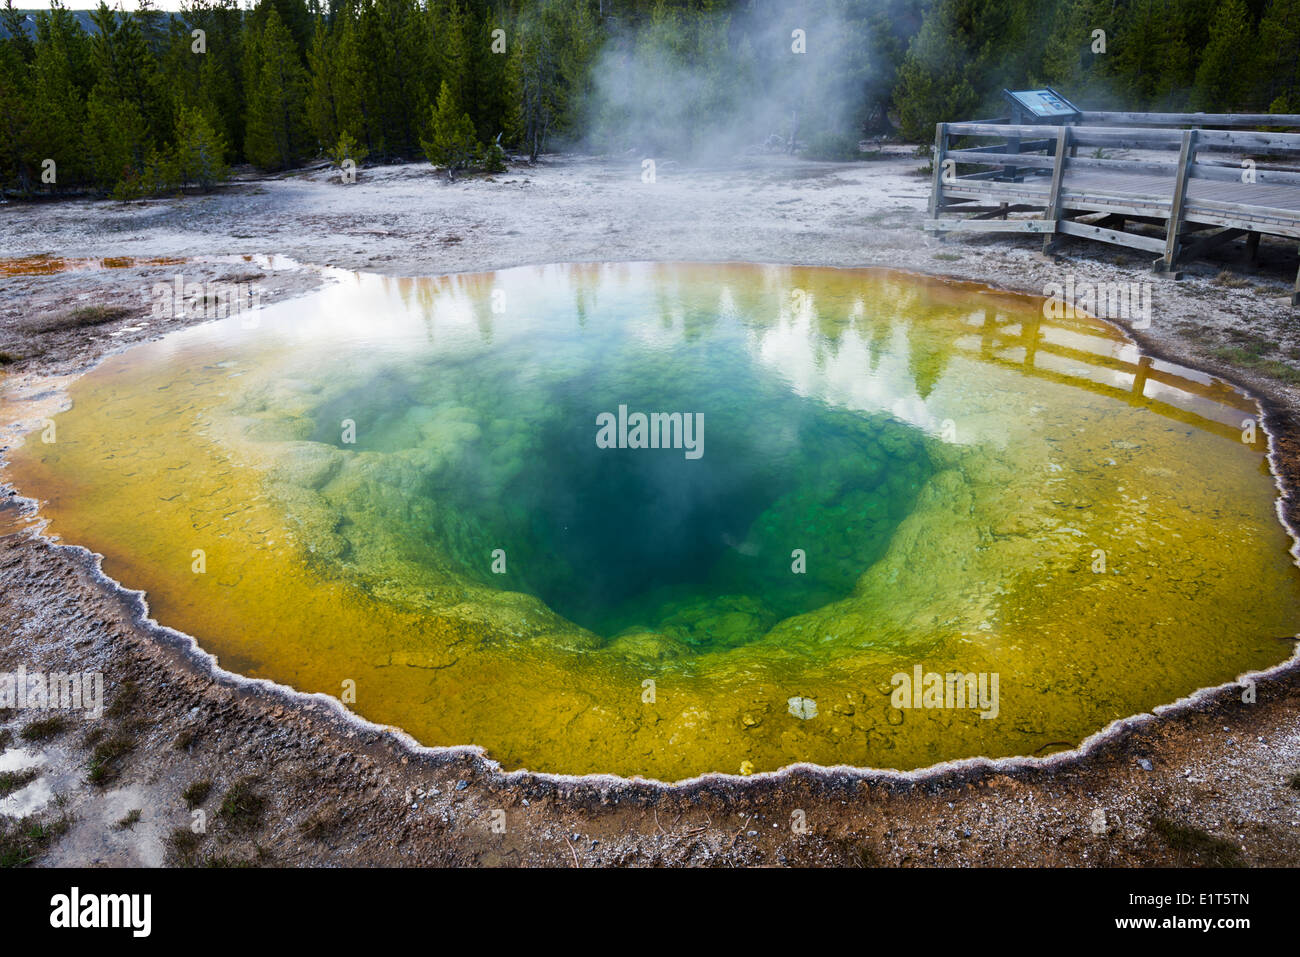 Colorful waters of the Morning Glory hot spring. Yellowstone National Park, Wyoming, USA. Stock Photo